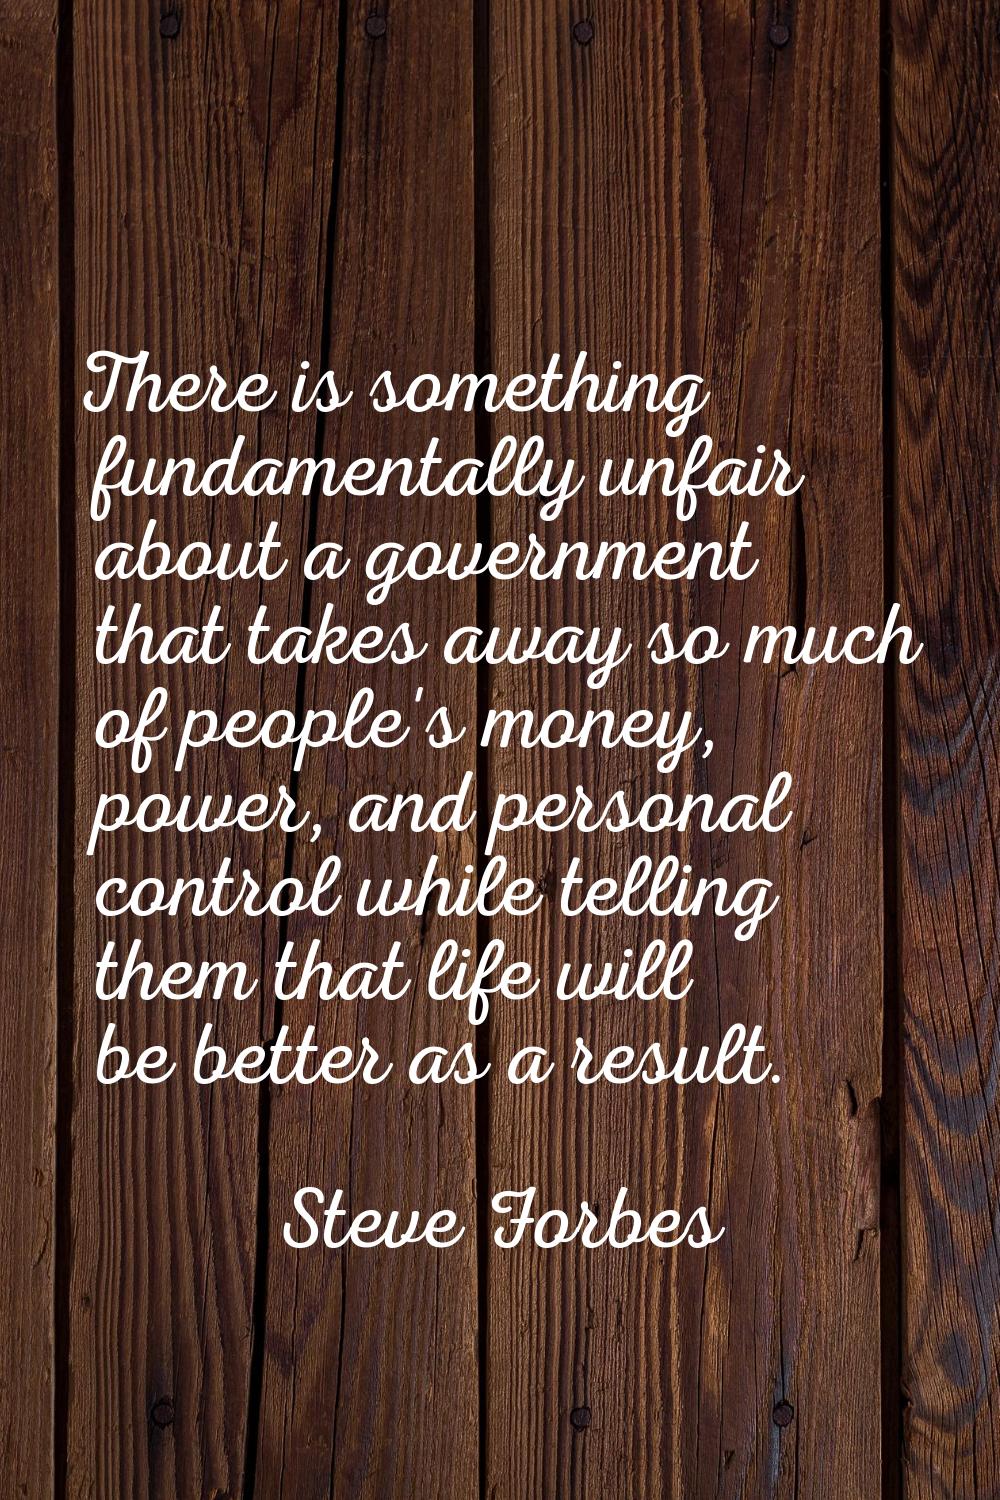 There is something fundamentally unfair about a government that takes away so much of people's mone